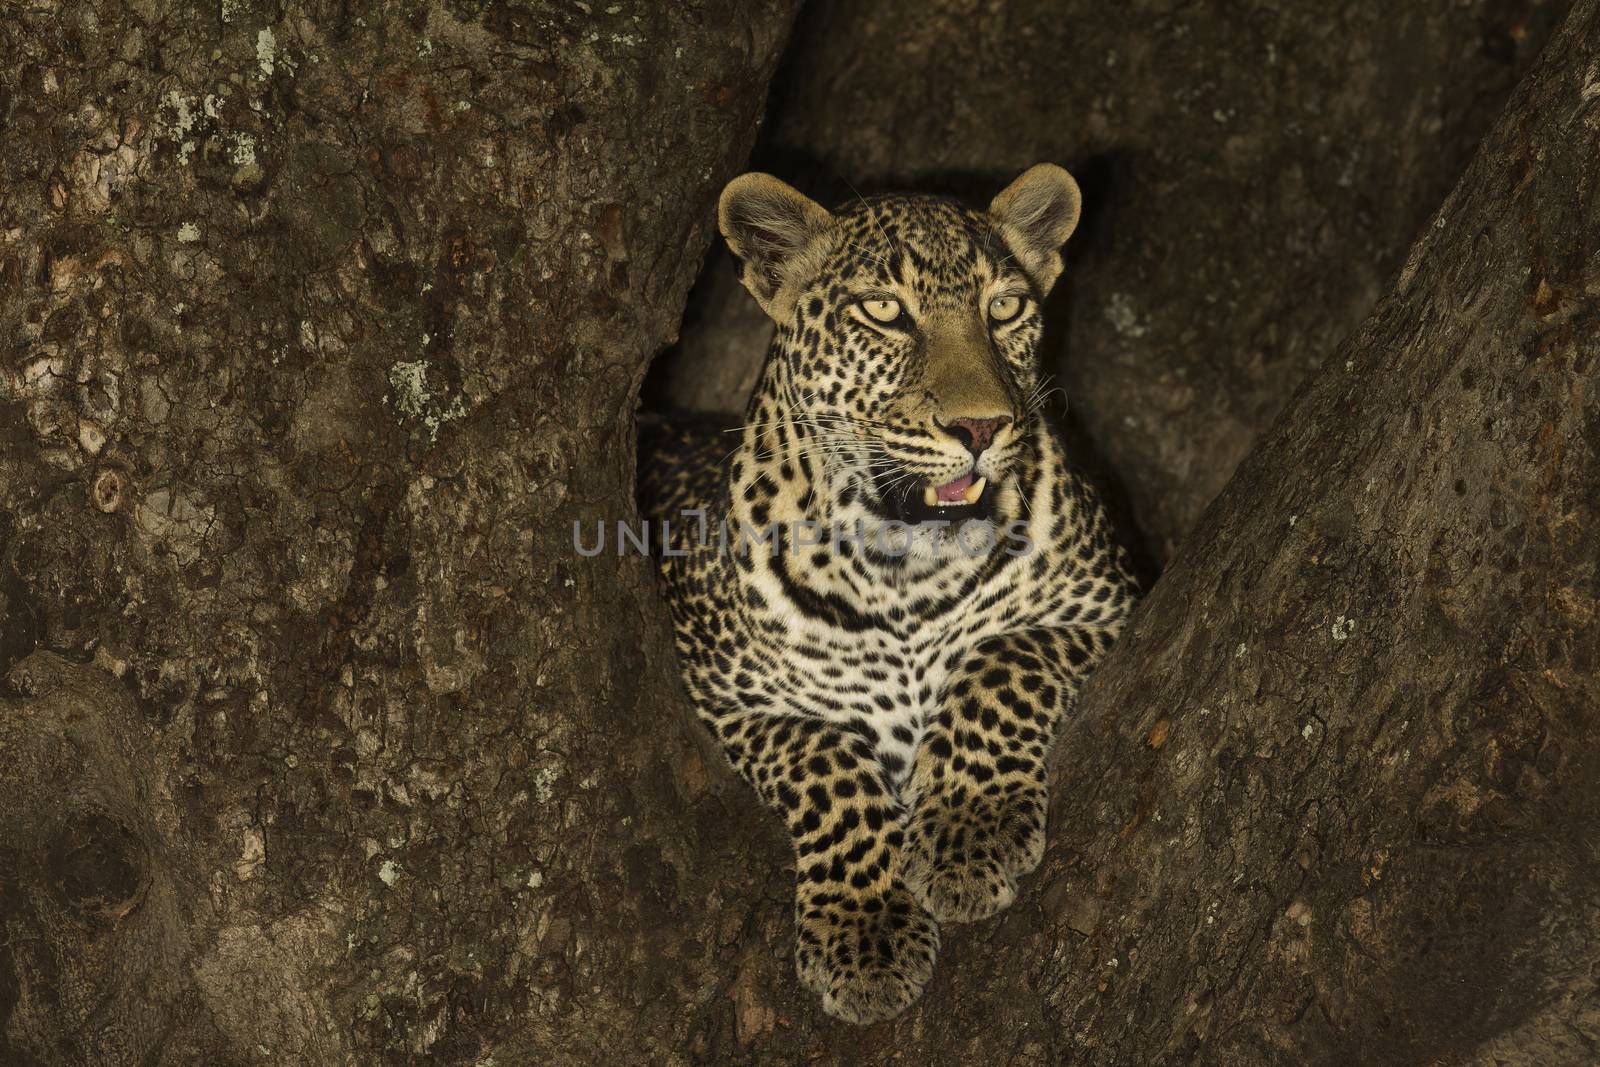 Leopard on tree in the wilderness of Africa